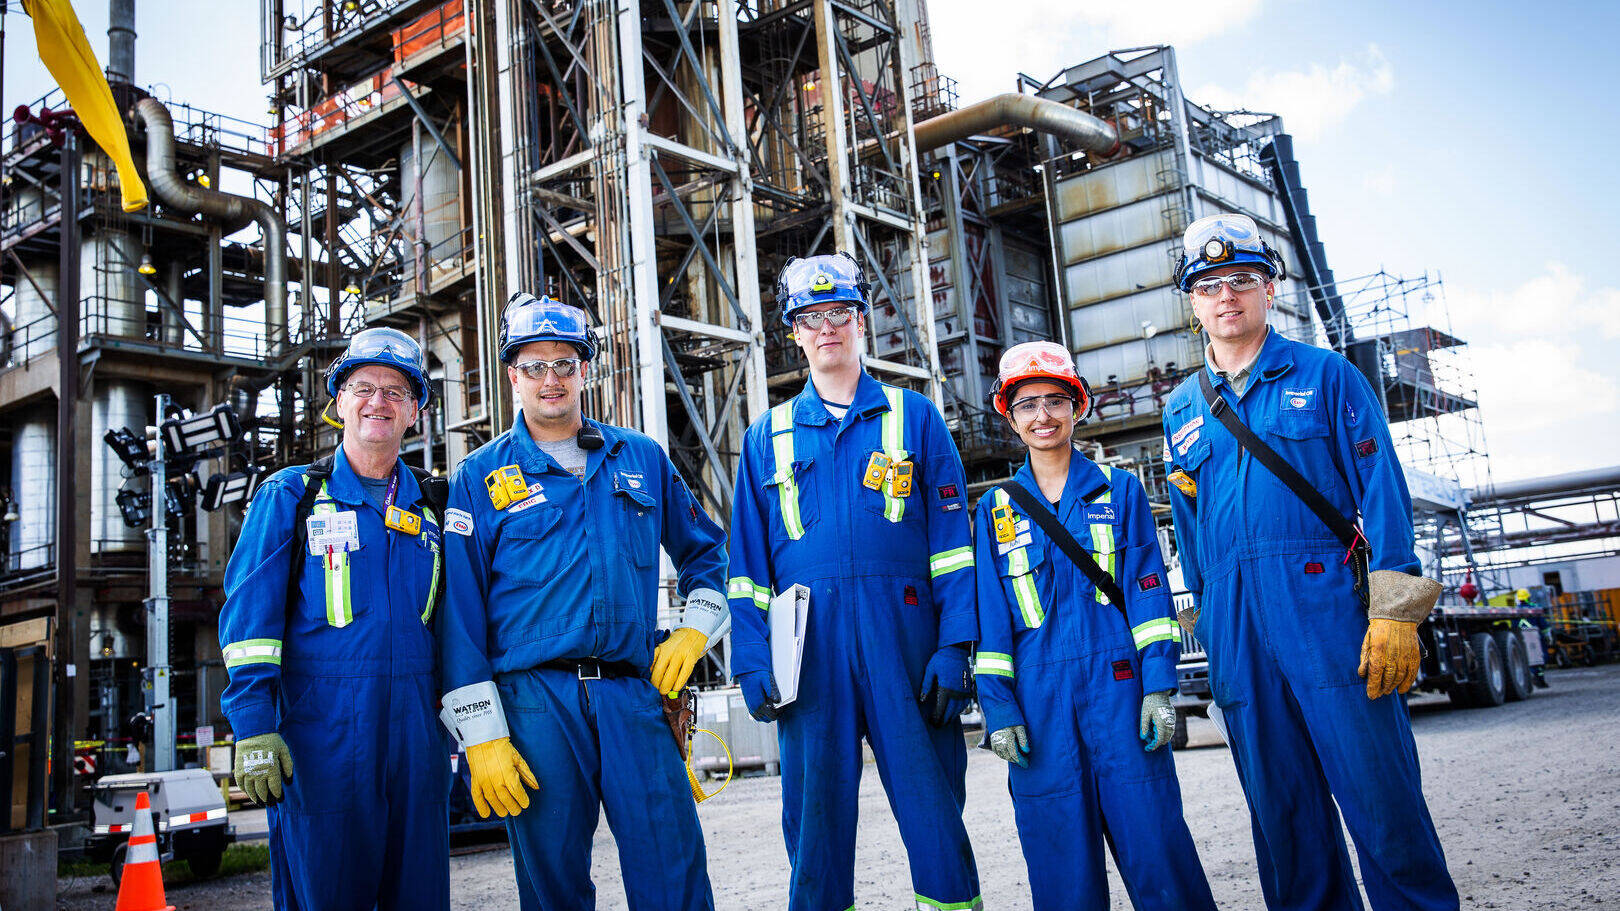 workers at refinery wearing safety clothing and accessories